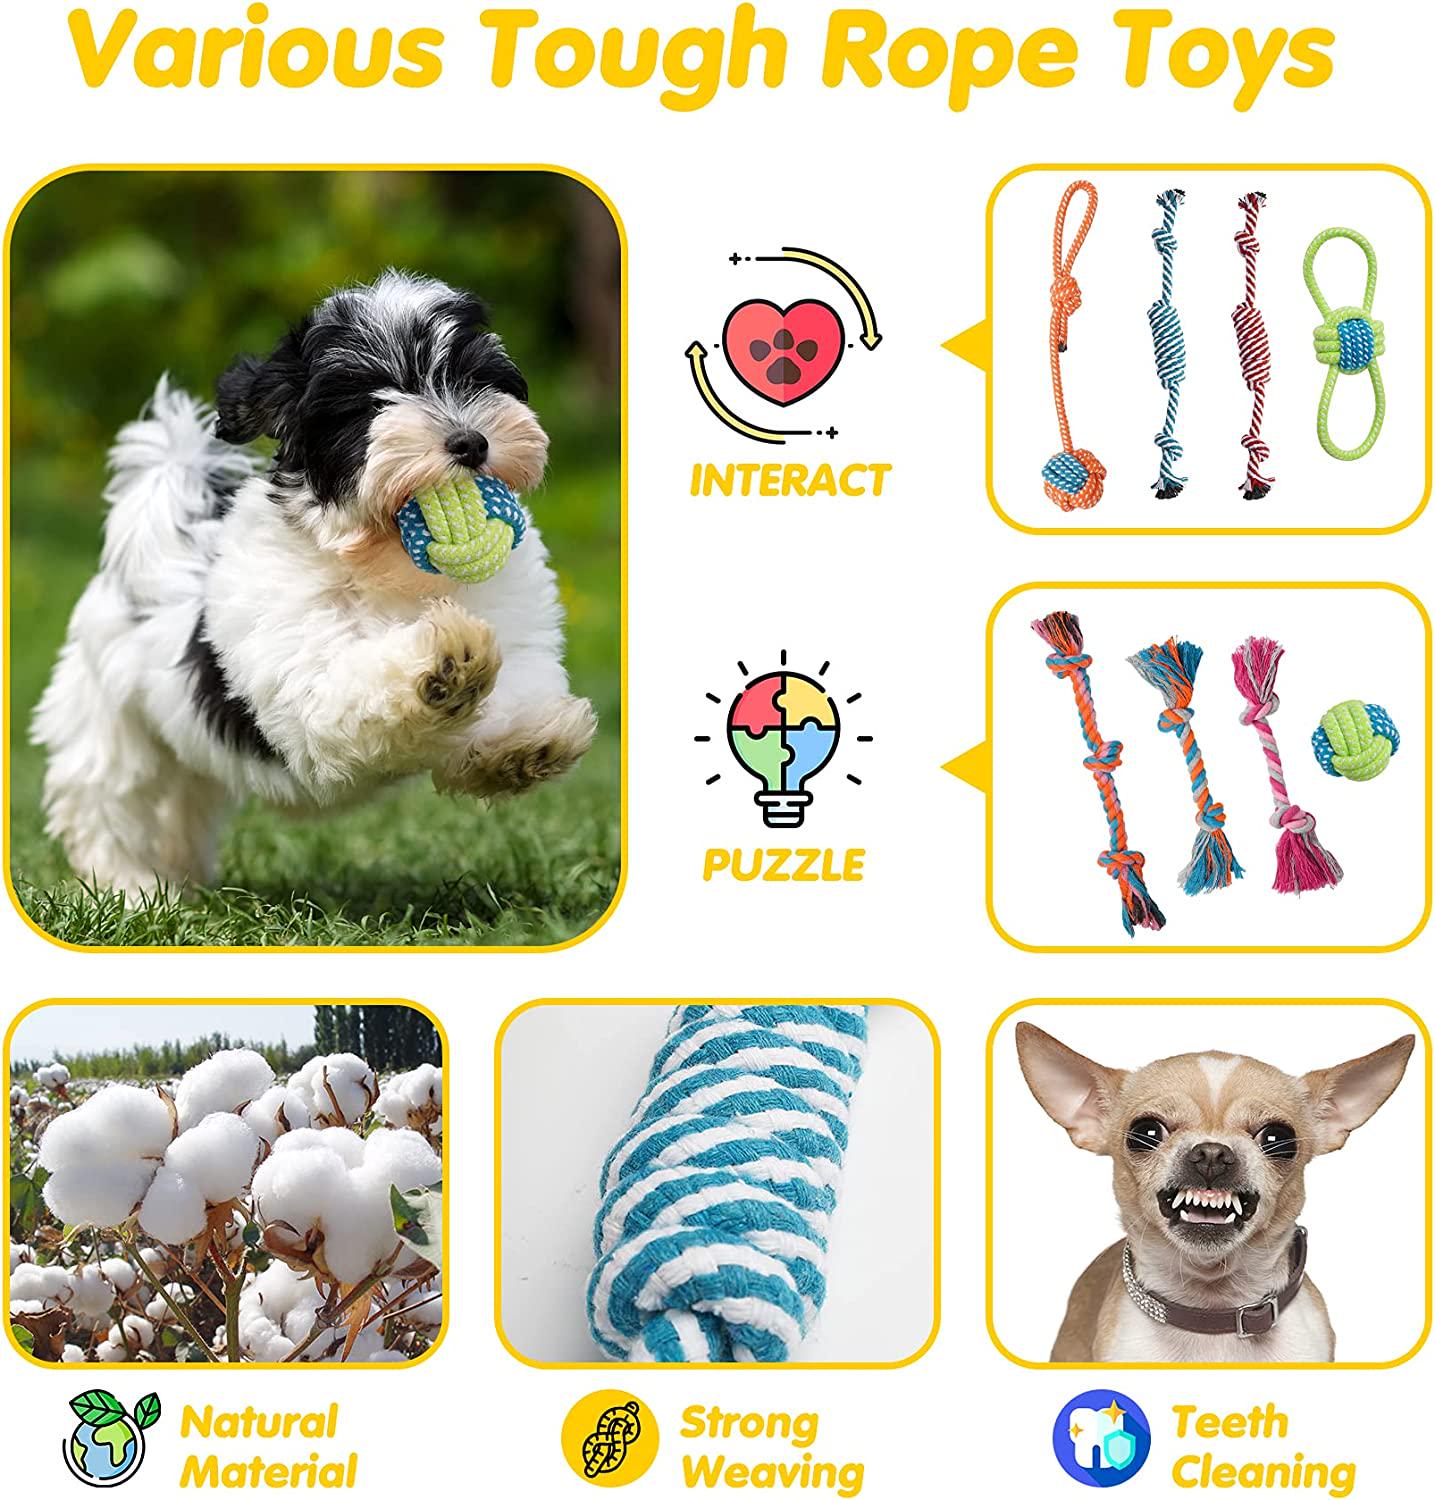 20 Pack Luxury Dog Chew Toys for Puppy, Cute Small Dog Toys with Ropes Puppy Chew Toys, Treat Ball and Squeaky Puppy Toys for Teething Small Dogs